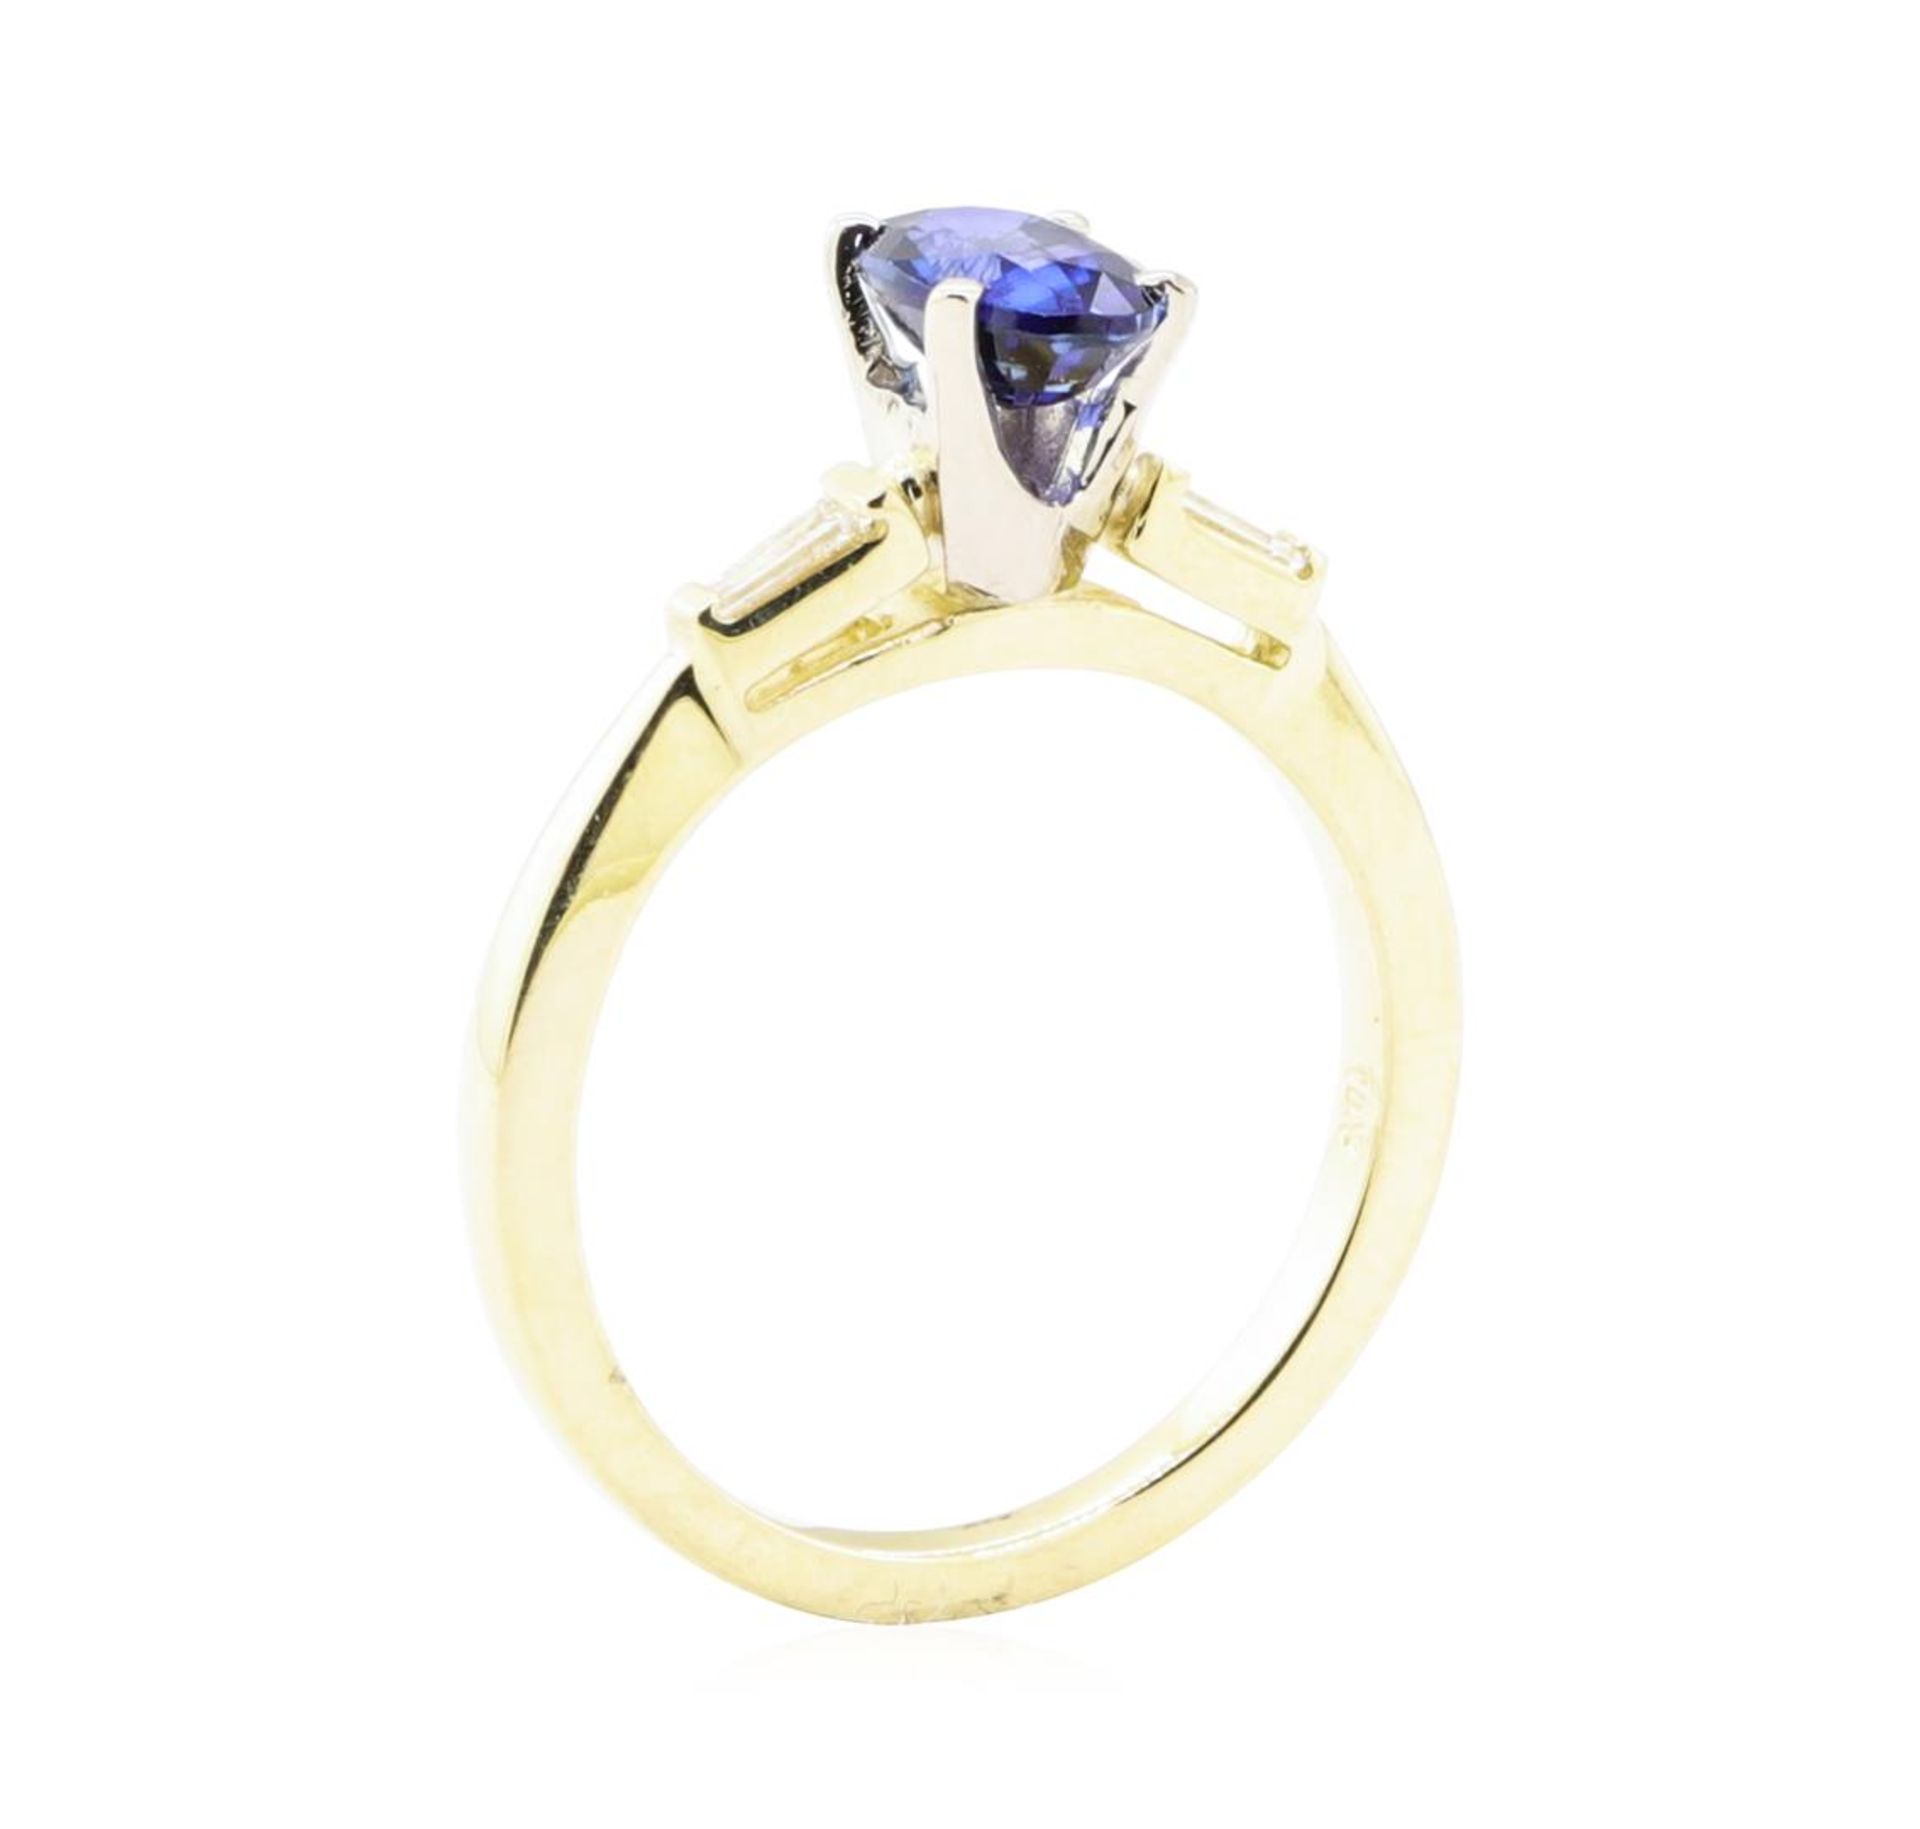 1.22 ctw Sapphire and Diamond Ring - 14KT Yellow Gold - Image 4 of 4